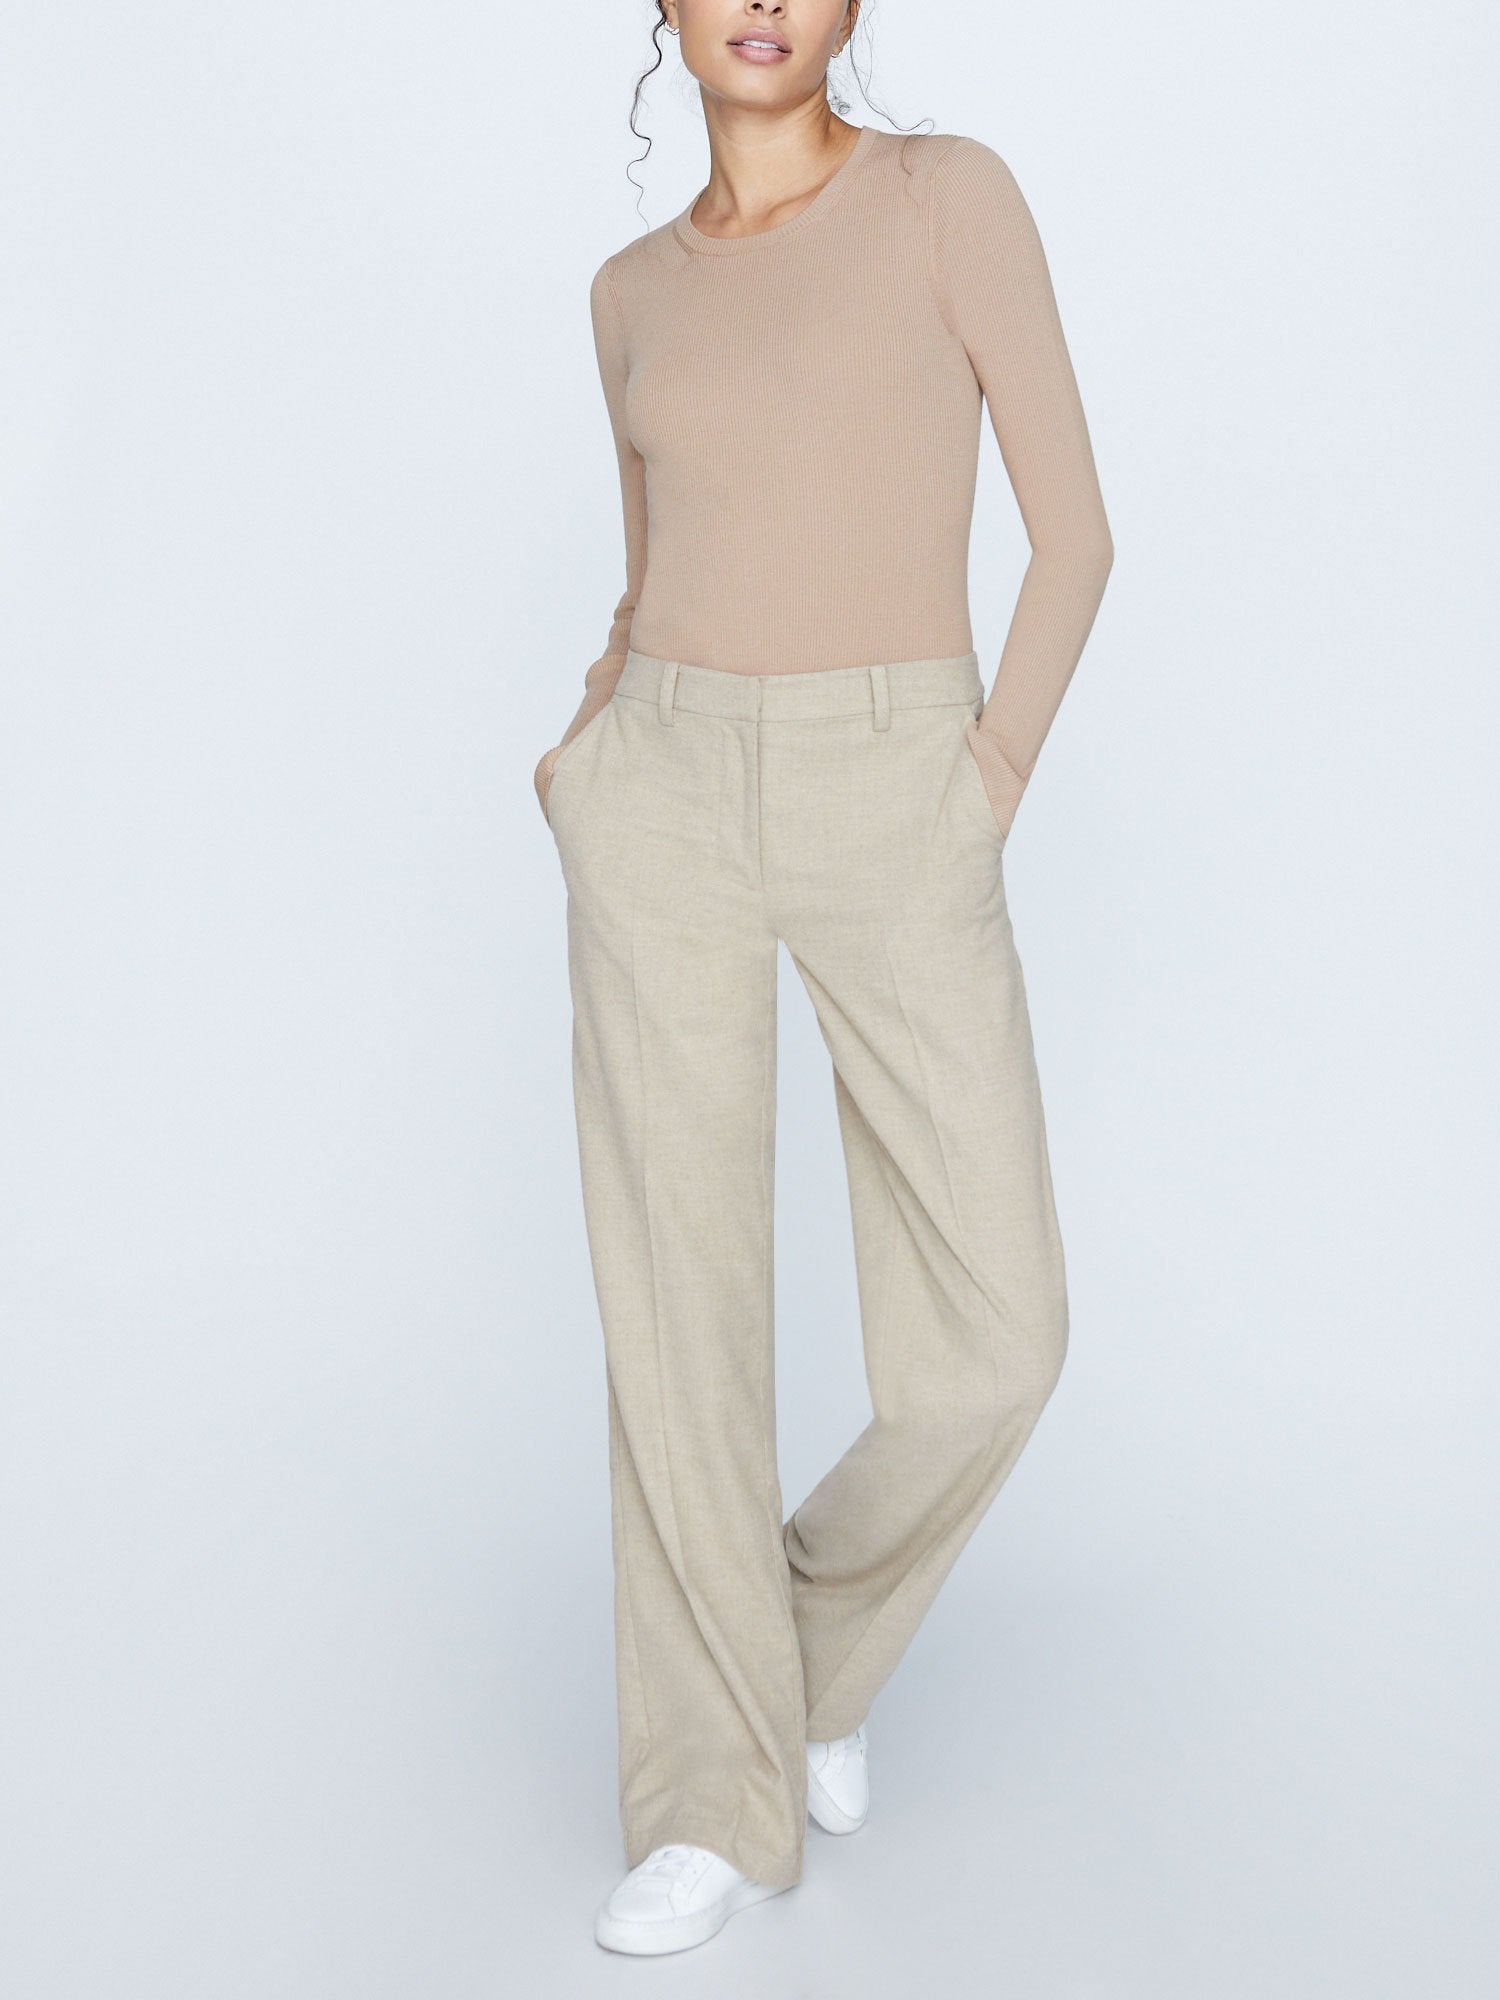 The Adel Pant